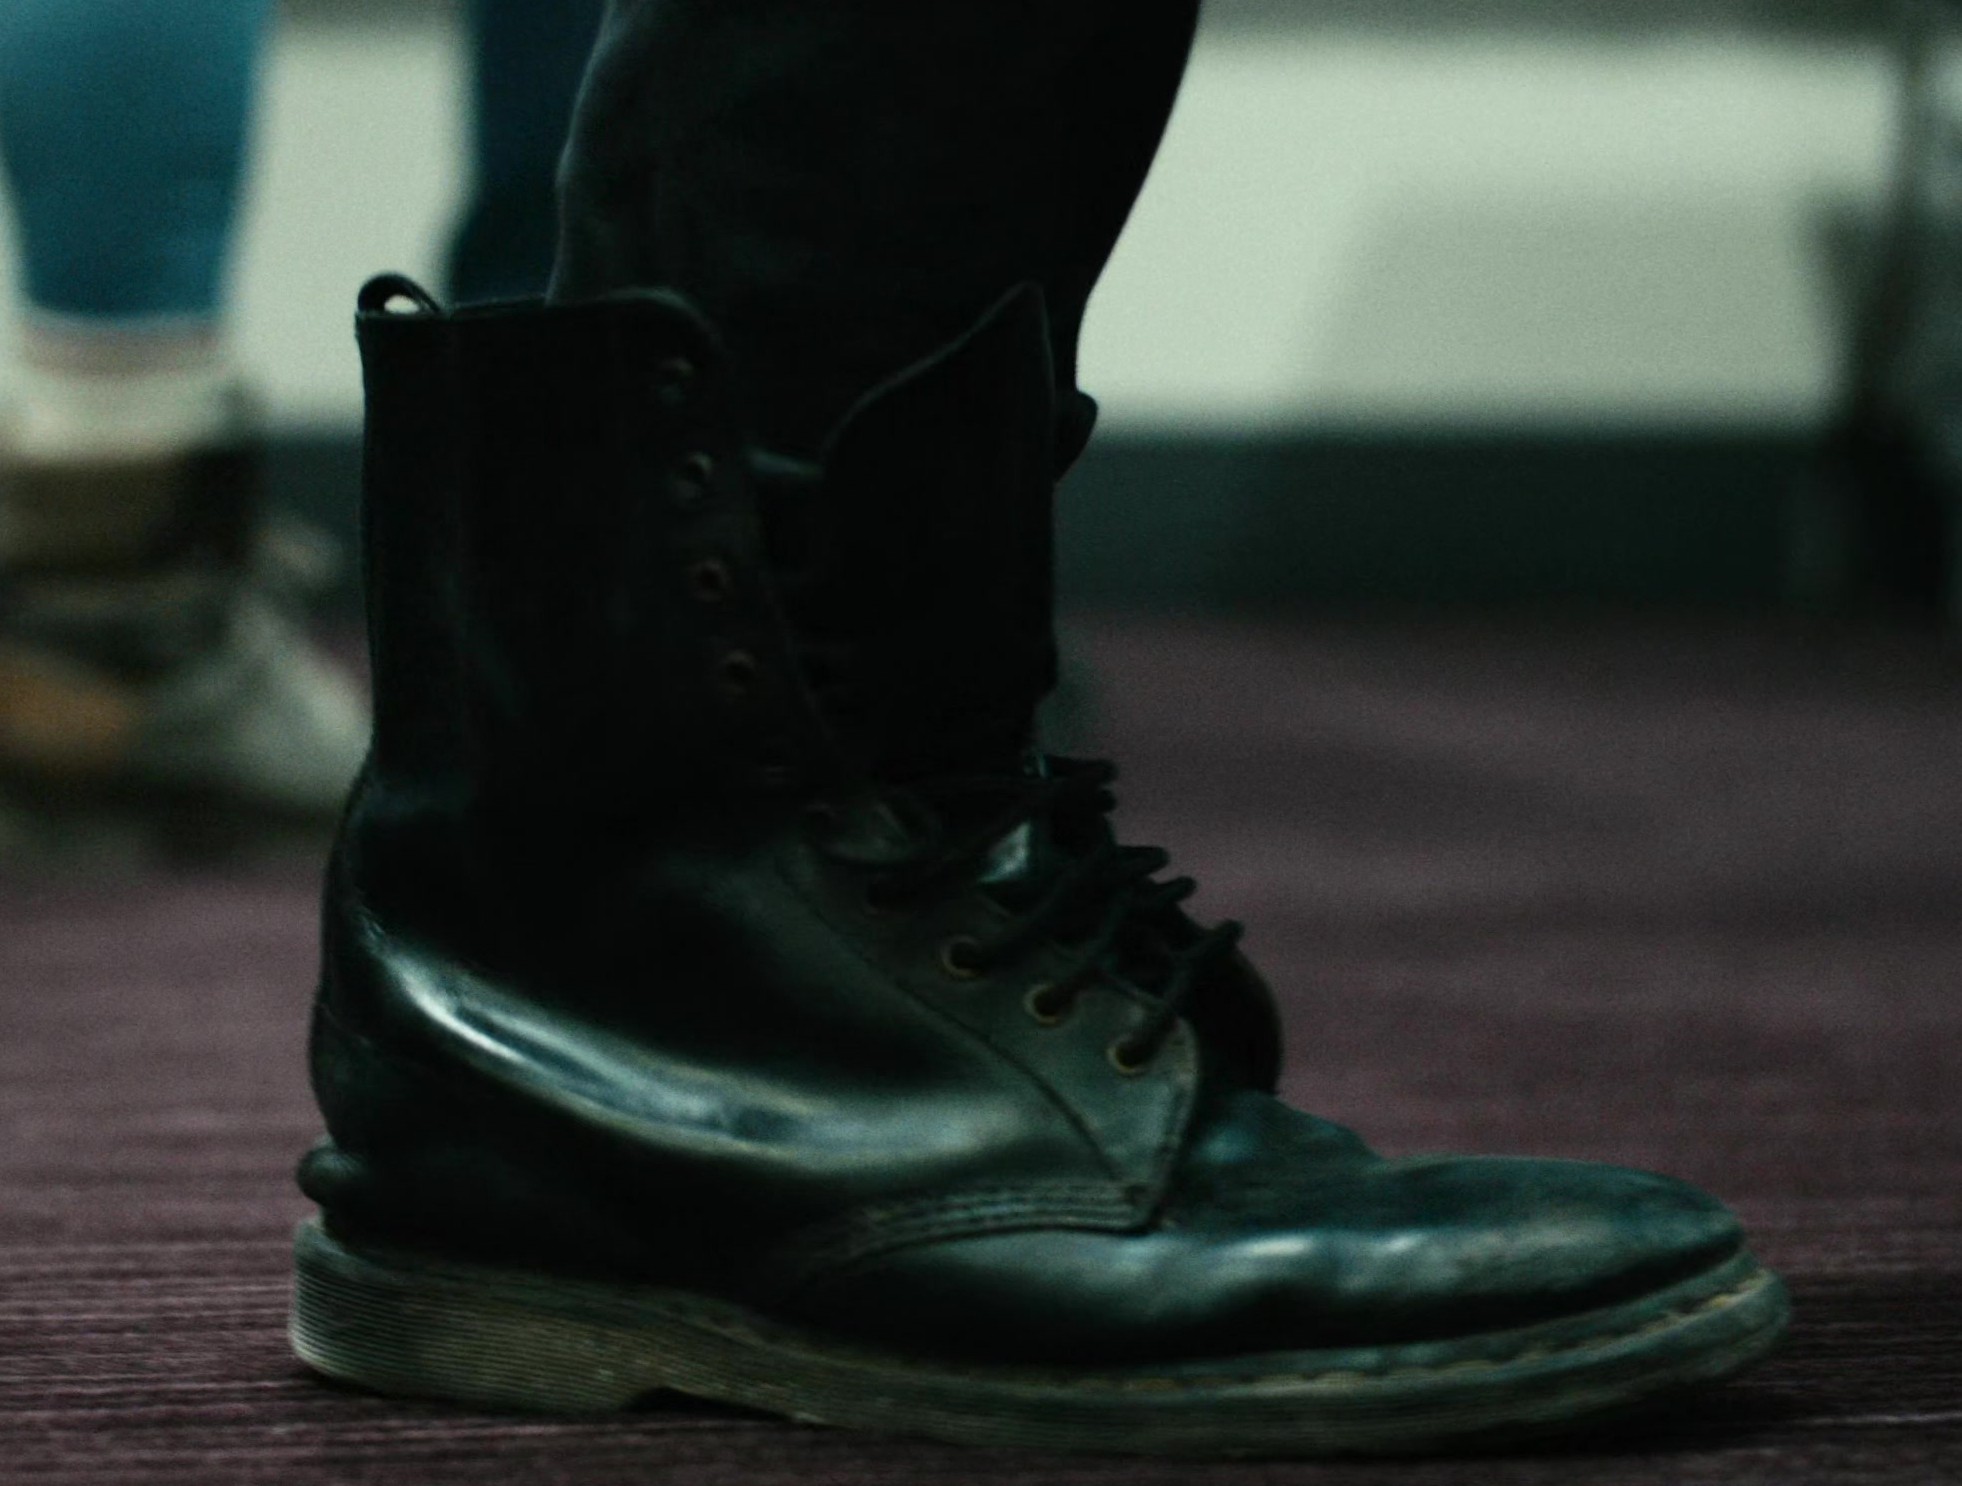 Worn on The Boys TV Show - Black Military Lace-Up Boots of Karl Urban as Billy Butcher